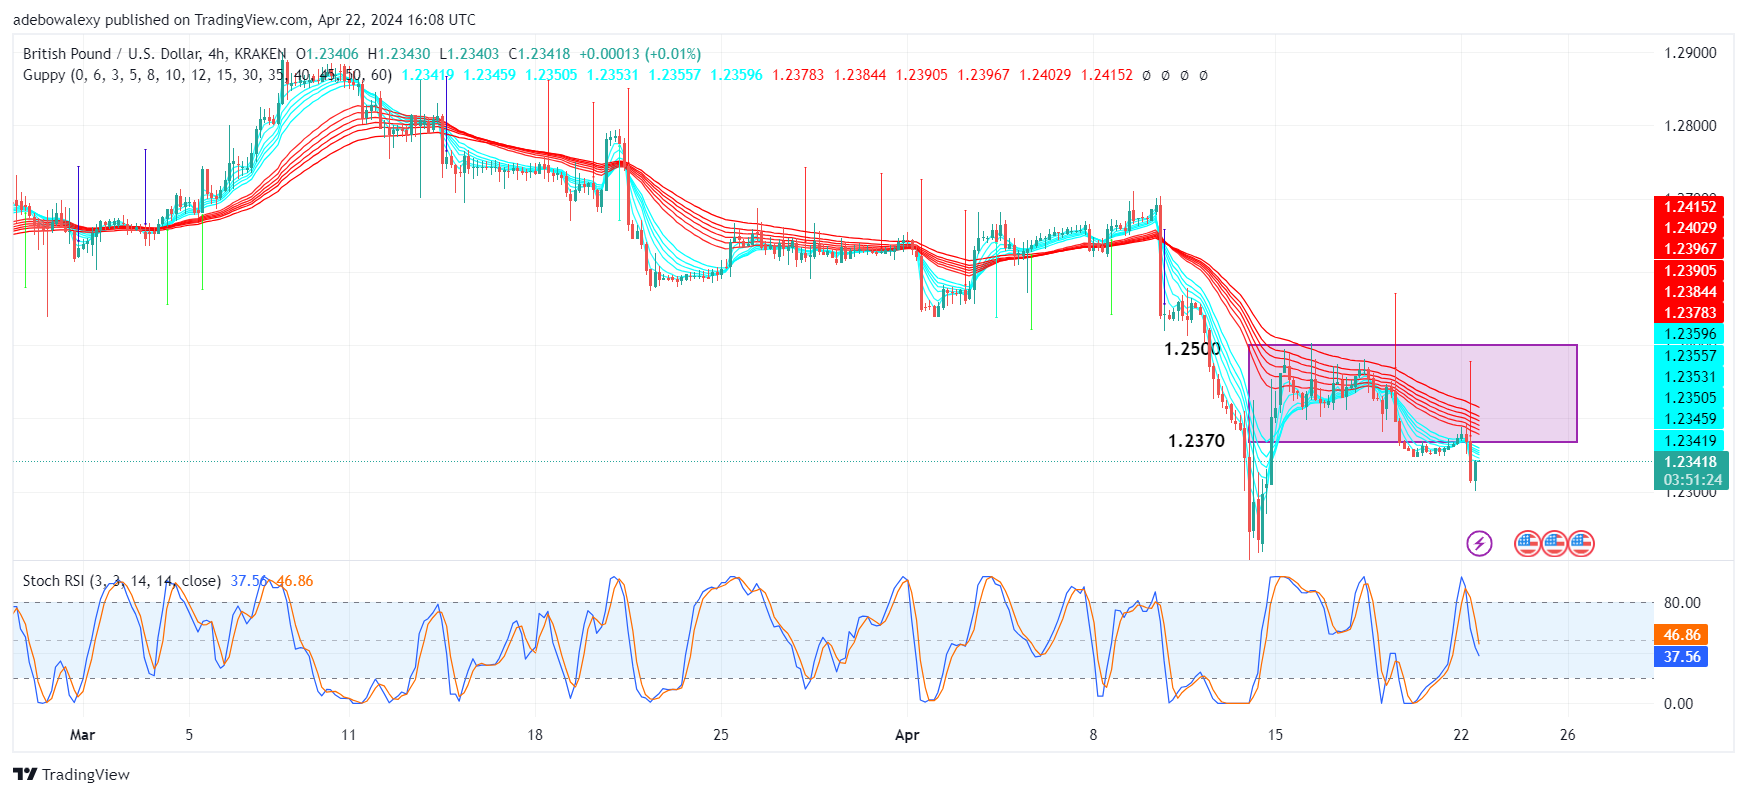 GBPUSD Shows Hopes of Recovery